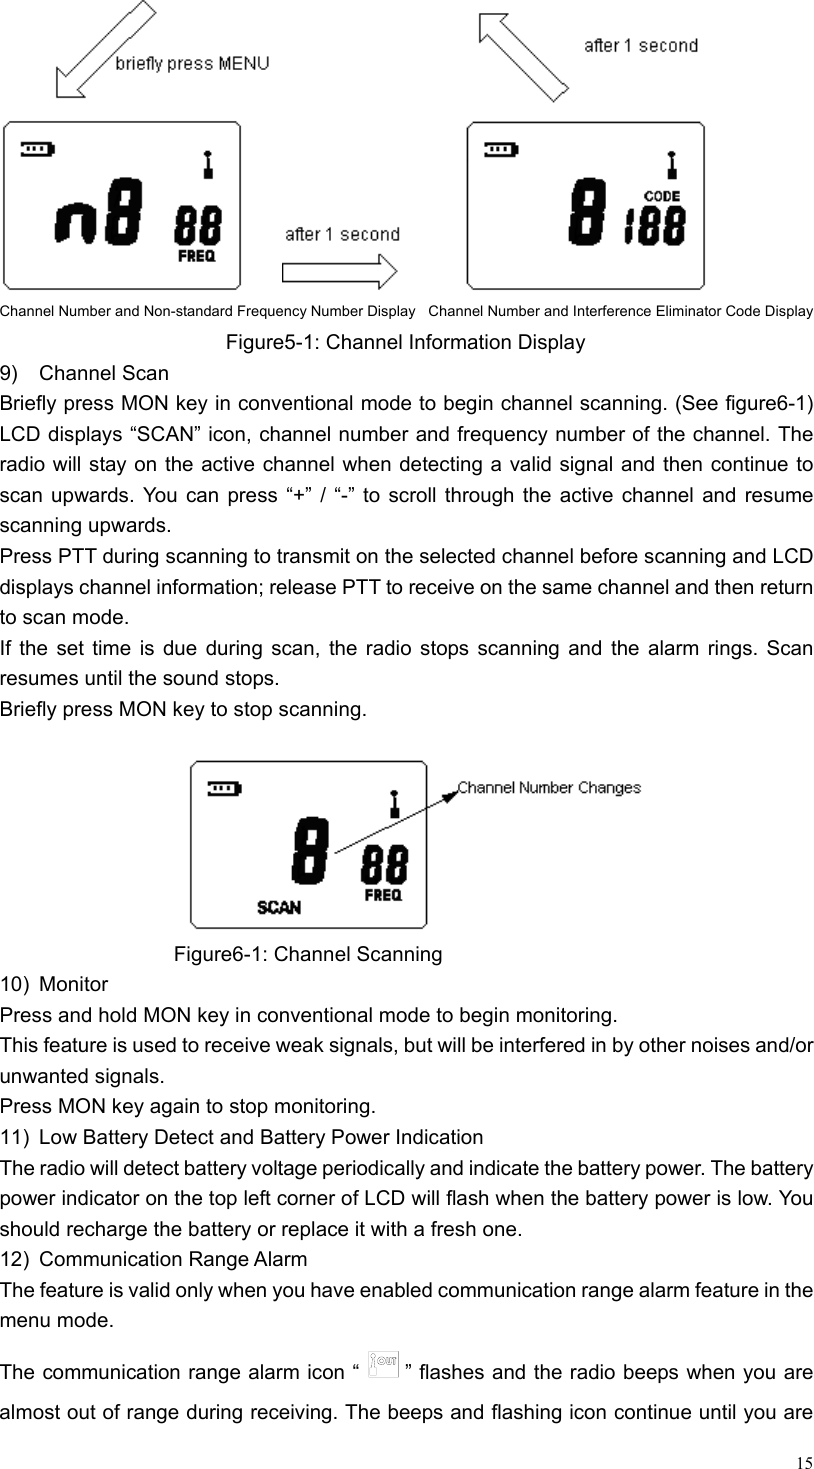  15                                   Channel Number and Non-standard Frequency Number Display    Channel Number and Interference Eliminator Code Display                                    Figure5-1: Channel Information Display 9) Channel Scan Briefly press MON key in conventional mode to begin channel scanning. (See figure6-1) LCD displays “SCAN” icon, channel number and frequency number of the channel. The radio will stay on the active channel when detecting a valid signal and then continue to scan upwards. You can press “+” / “-” to scroll through the active channel and resume scanning upwards. Press PTT during scanning to transmit on the selected channel before scanning and LCD displays channel information; release PTT to receive on the same channel and then return to scan mode. If the set time is due during scan, the radio stops scanning and the alarm rings. Scan resumes until the sound stops. Briefly press MON key to stop scanning.                               Figure6-1: Channel Scanning 10) Monitor Press and hold MON key in conventional mode to begin monitoring. This feature is used to receive weak signals, but will be interfered in by other noises and/or unwanted signals. Press MON key again to stop monitoring. 11)  Low Battery Detect and Battery Power Indication The radio will detect battery voltage periodically and indicate the battery power. The battery power indicator on the top left corner of LCD will flash when the battery power is low. You should recharge the battery or replace it with a fresh one. 12) Communication Range Alarm The feature is valid only when you have enabled communication range alarm feature in the menu mode. The communication range alarm icon “ ” flashes and the radio beeps when you are almost out of range during receiving. The beeps and flashing icon continue until you are 